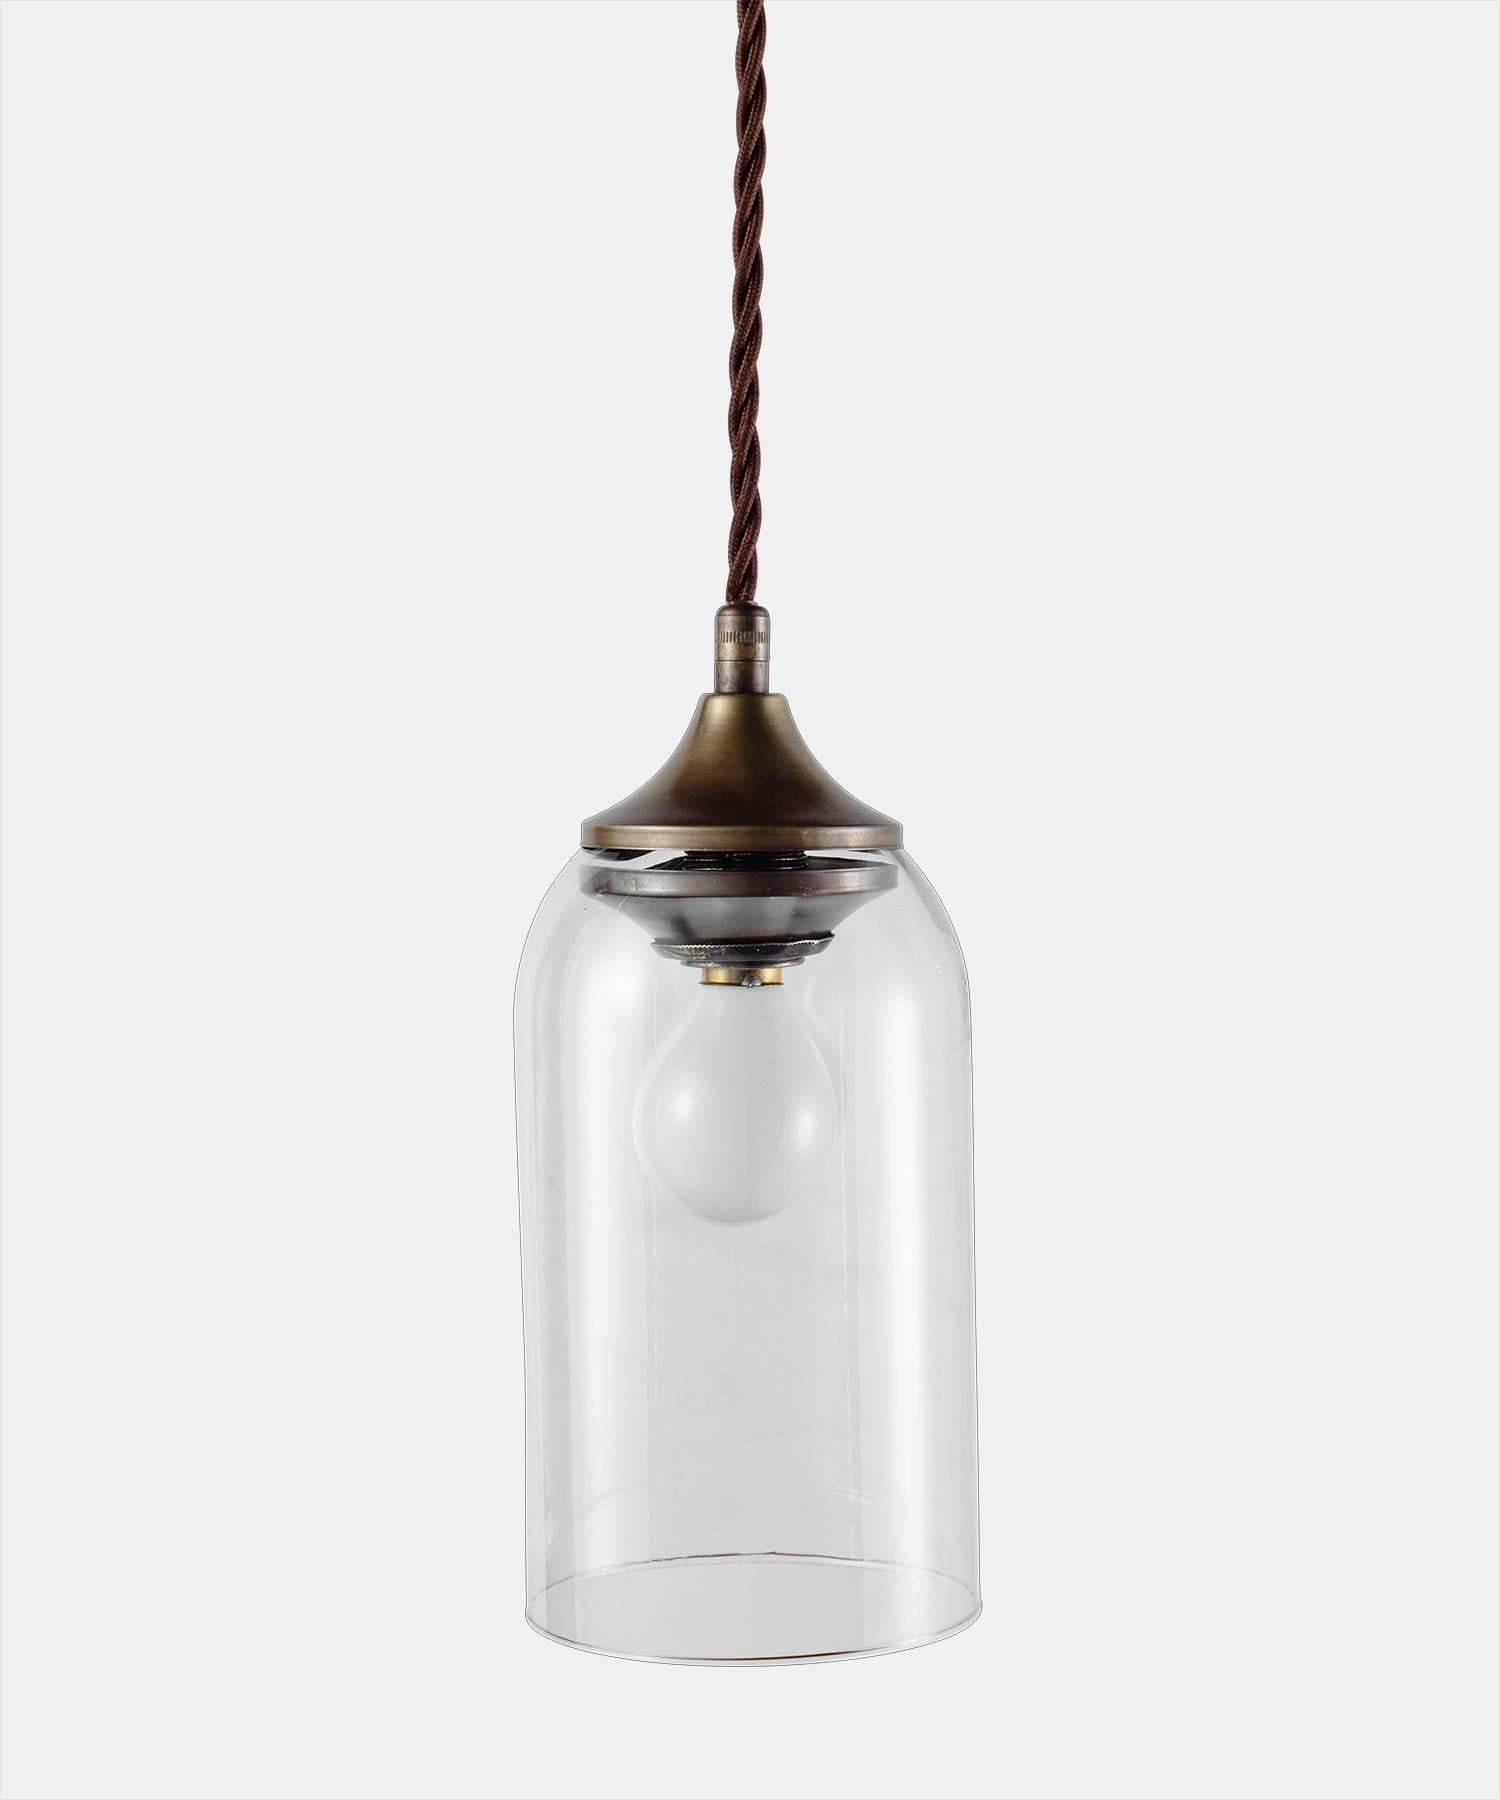 Petite Bell Glass Pendant, Italy, 21st century

With cylindrical open bottom form and brass fitter.